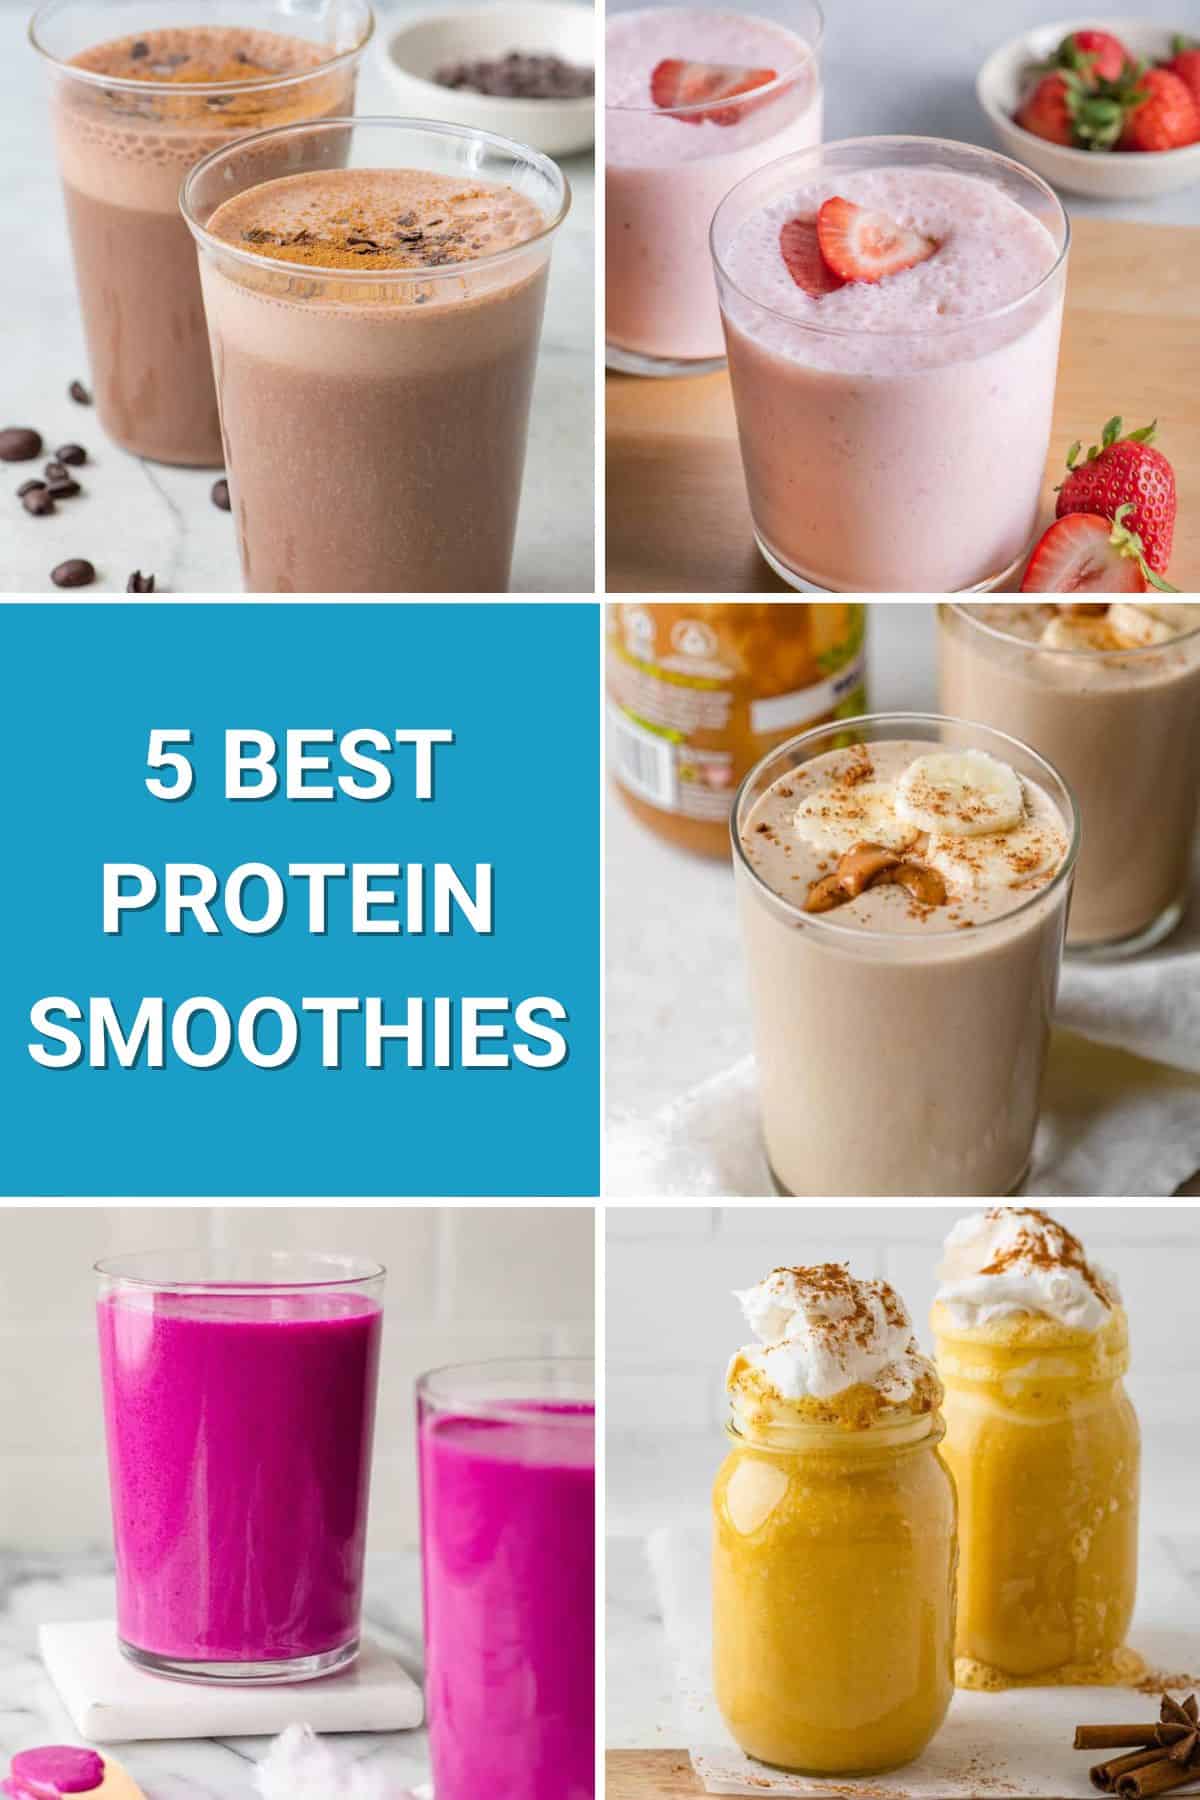 https://feelgoodfoodie.net/wp-content/uploads/2023/04/OptIn_Best-Protein-Smoothies.jpg